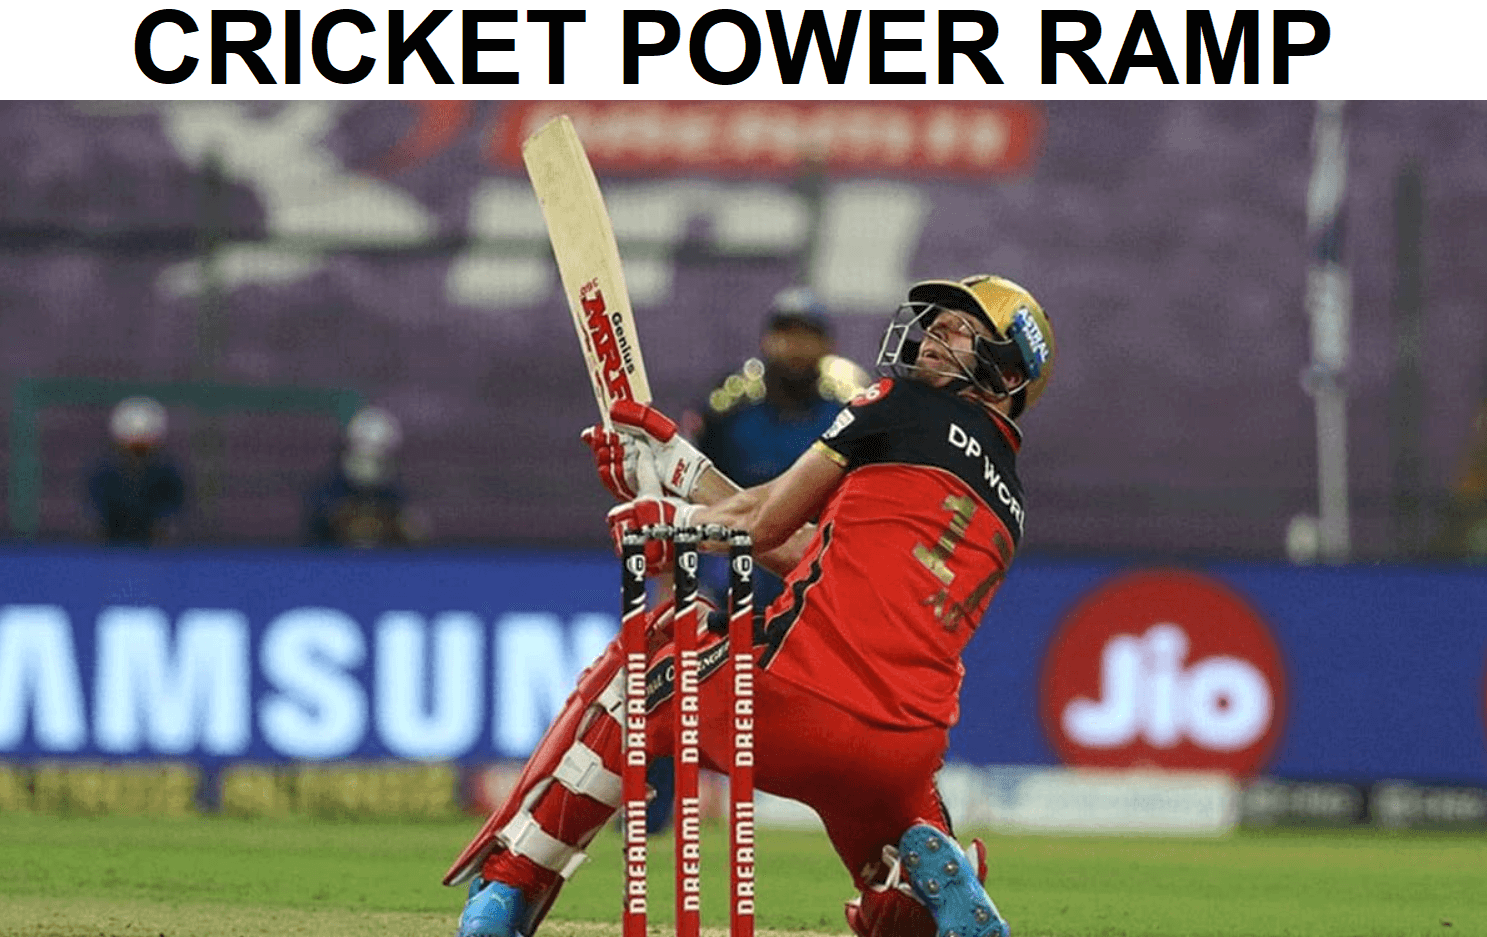 What is a power ramp in the sport of cricket?